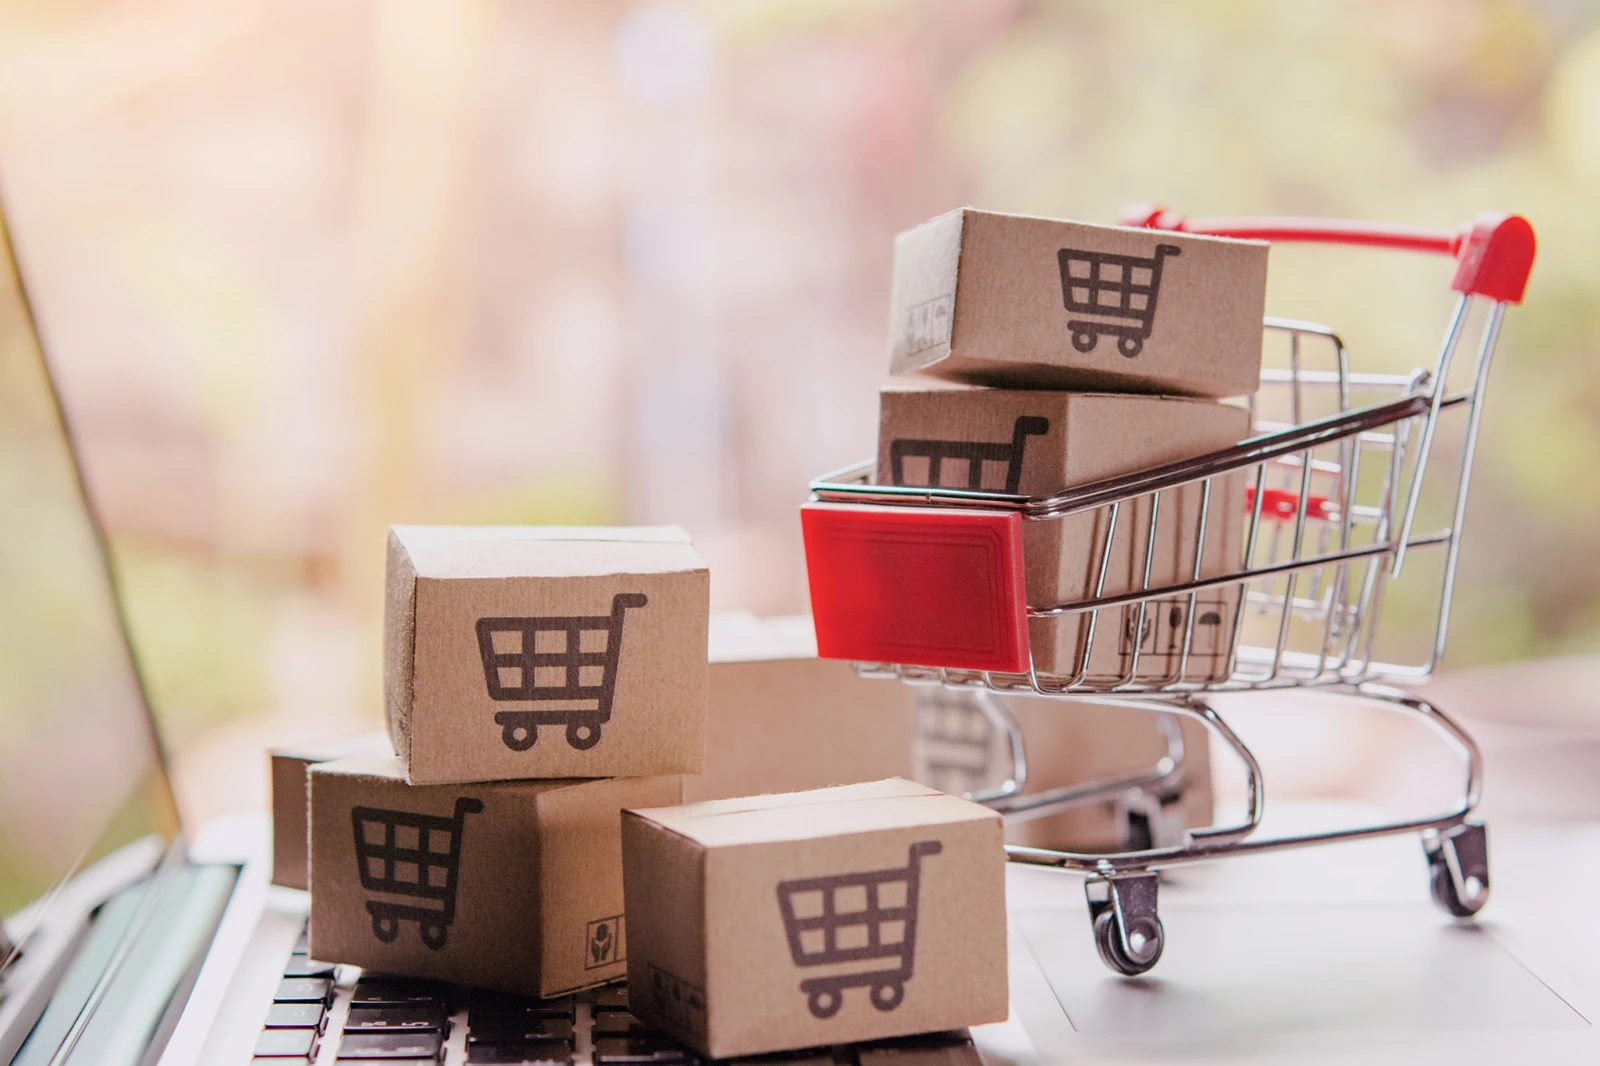 shopping-online-concept-parcel-or-paper-cartons-with-shopping-cart-logo-in-trolley-on-laptop-keyboard-shopping-service-on-the-online-web-offers-home-delivery